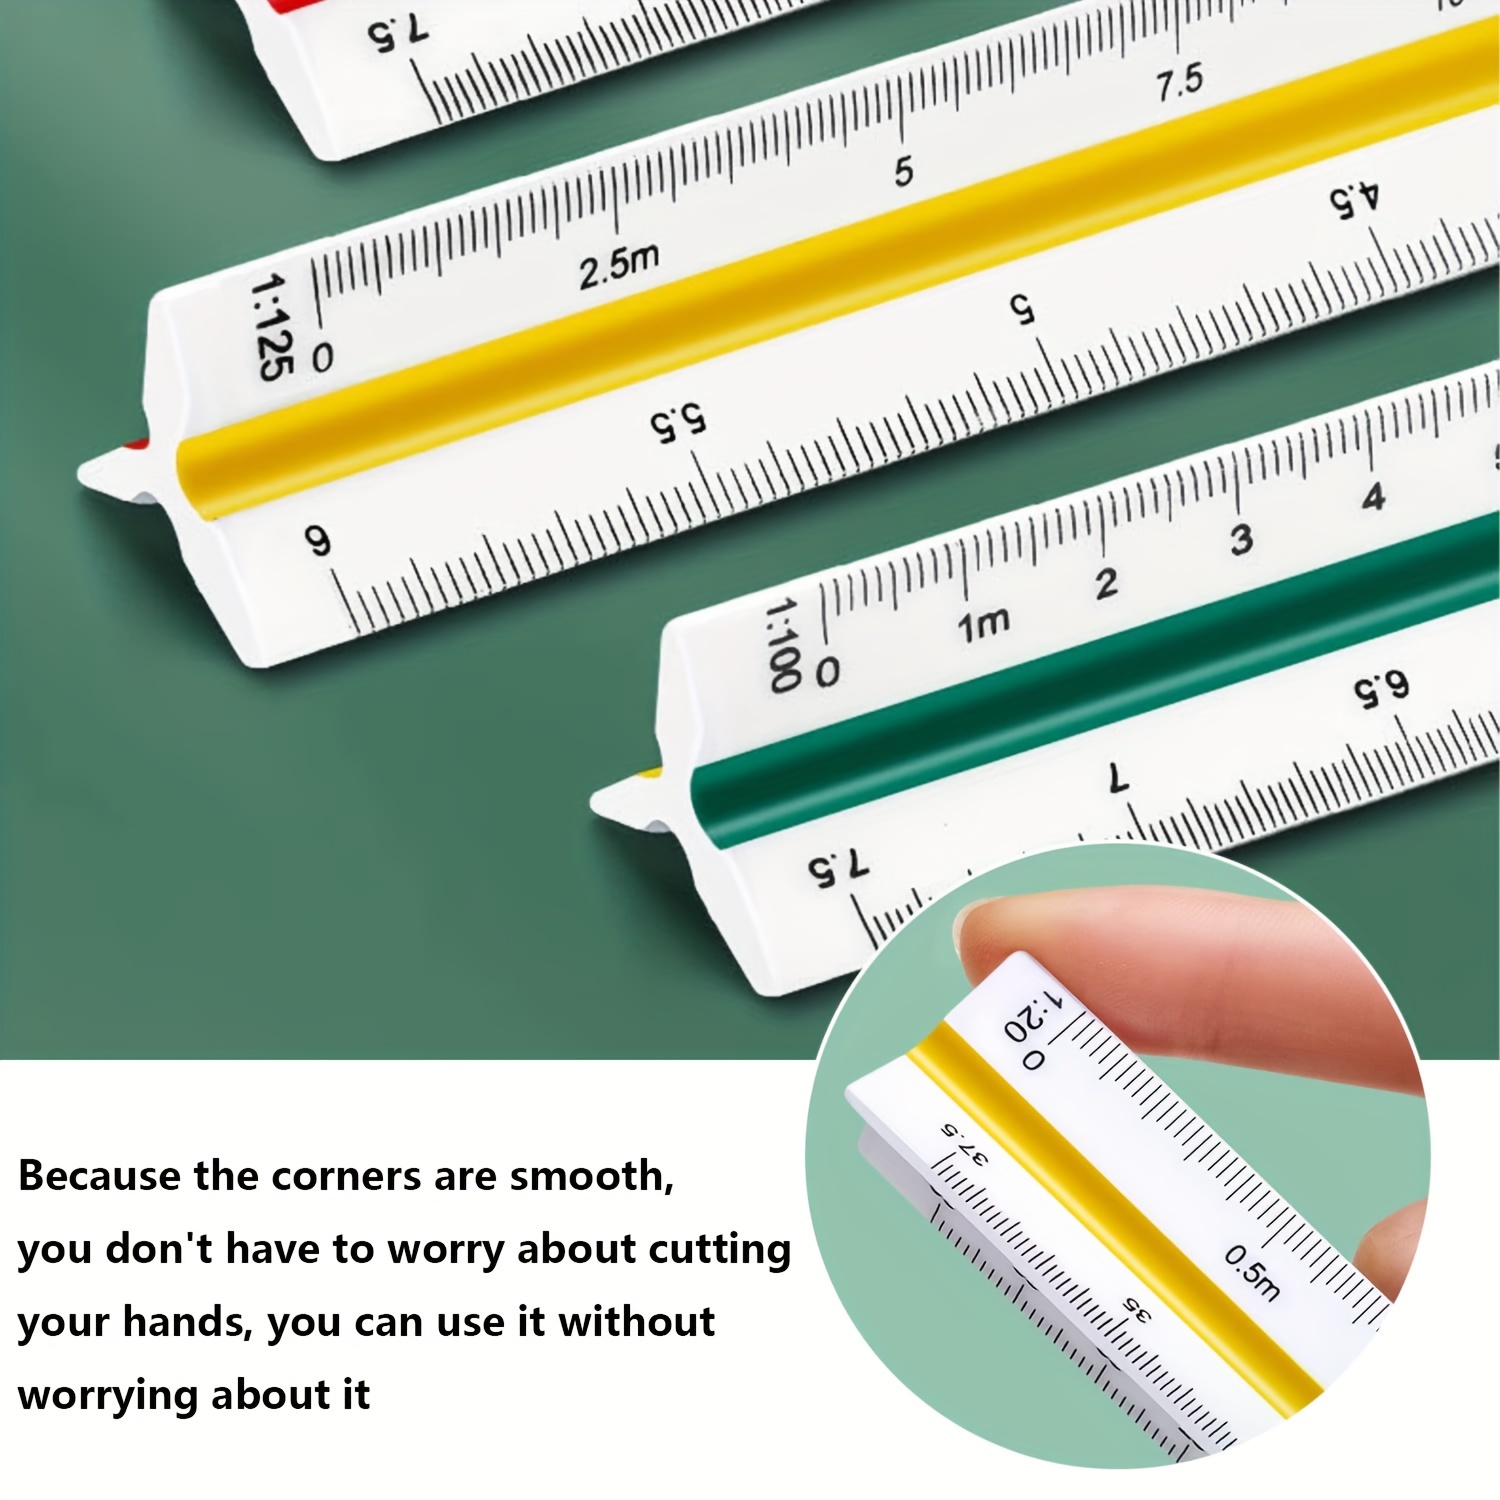 1:100 1:200 1:250 Triangular Metric Scale Ruler For Engineer